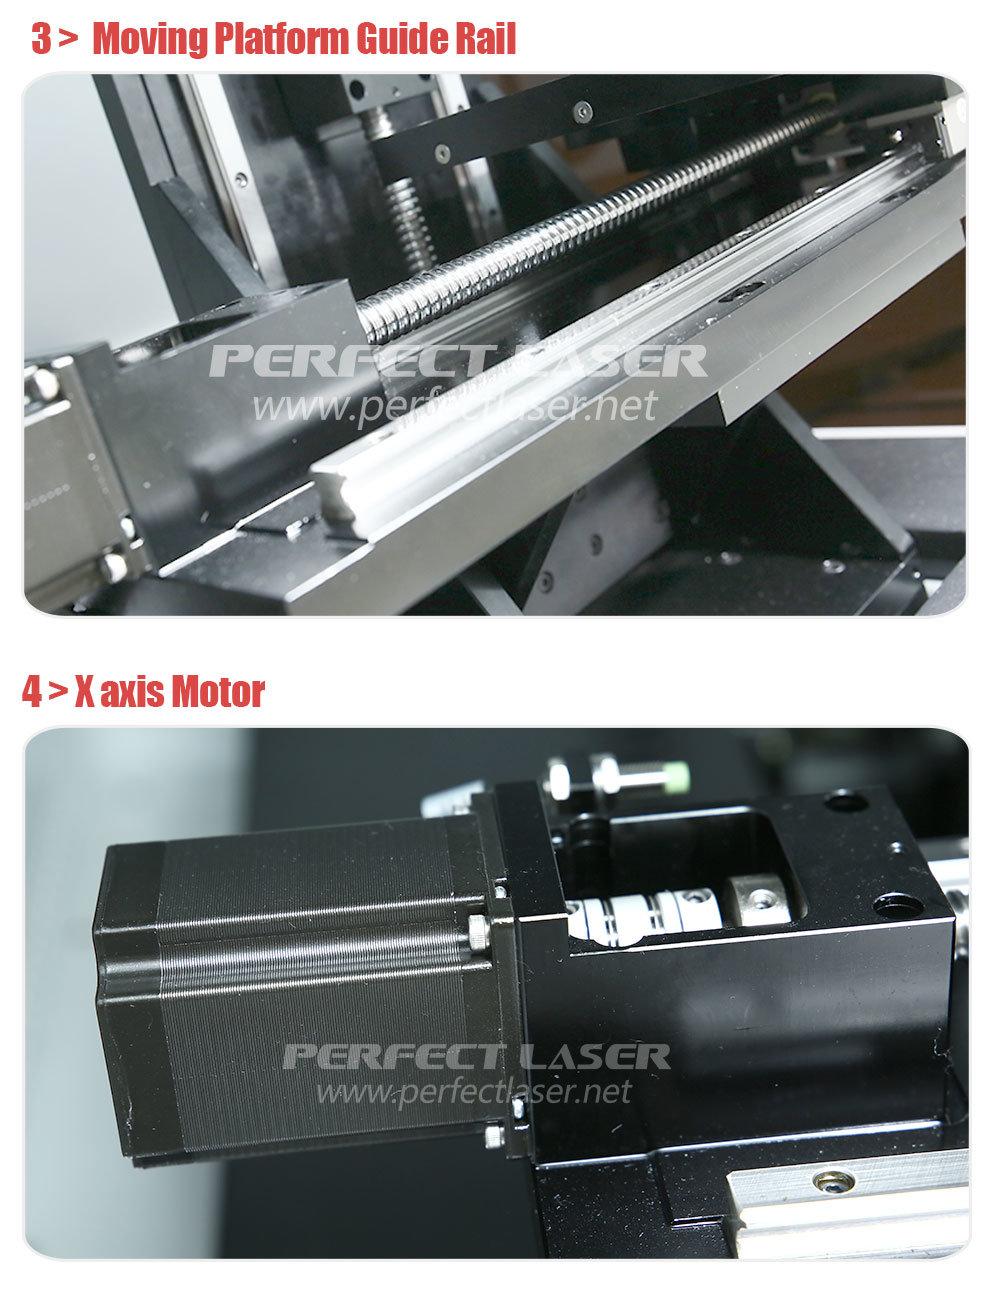 New Design 3D Sub Surface Laser Engraving Machine for Sale